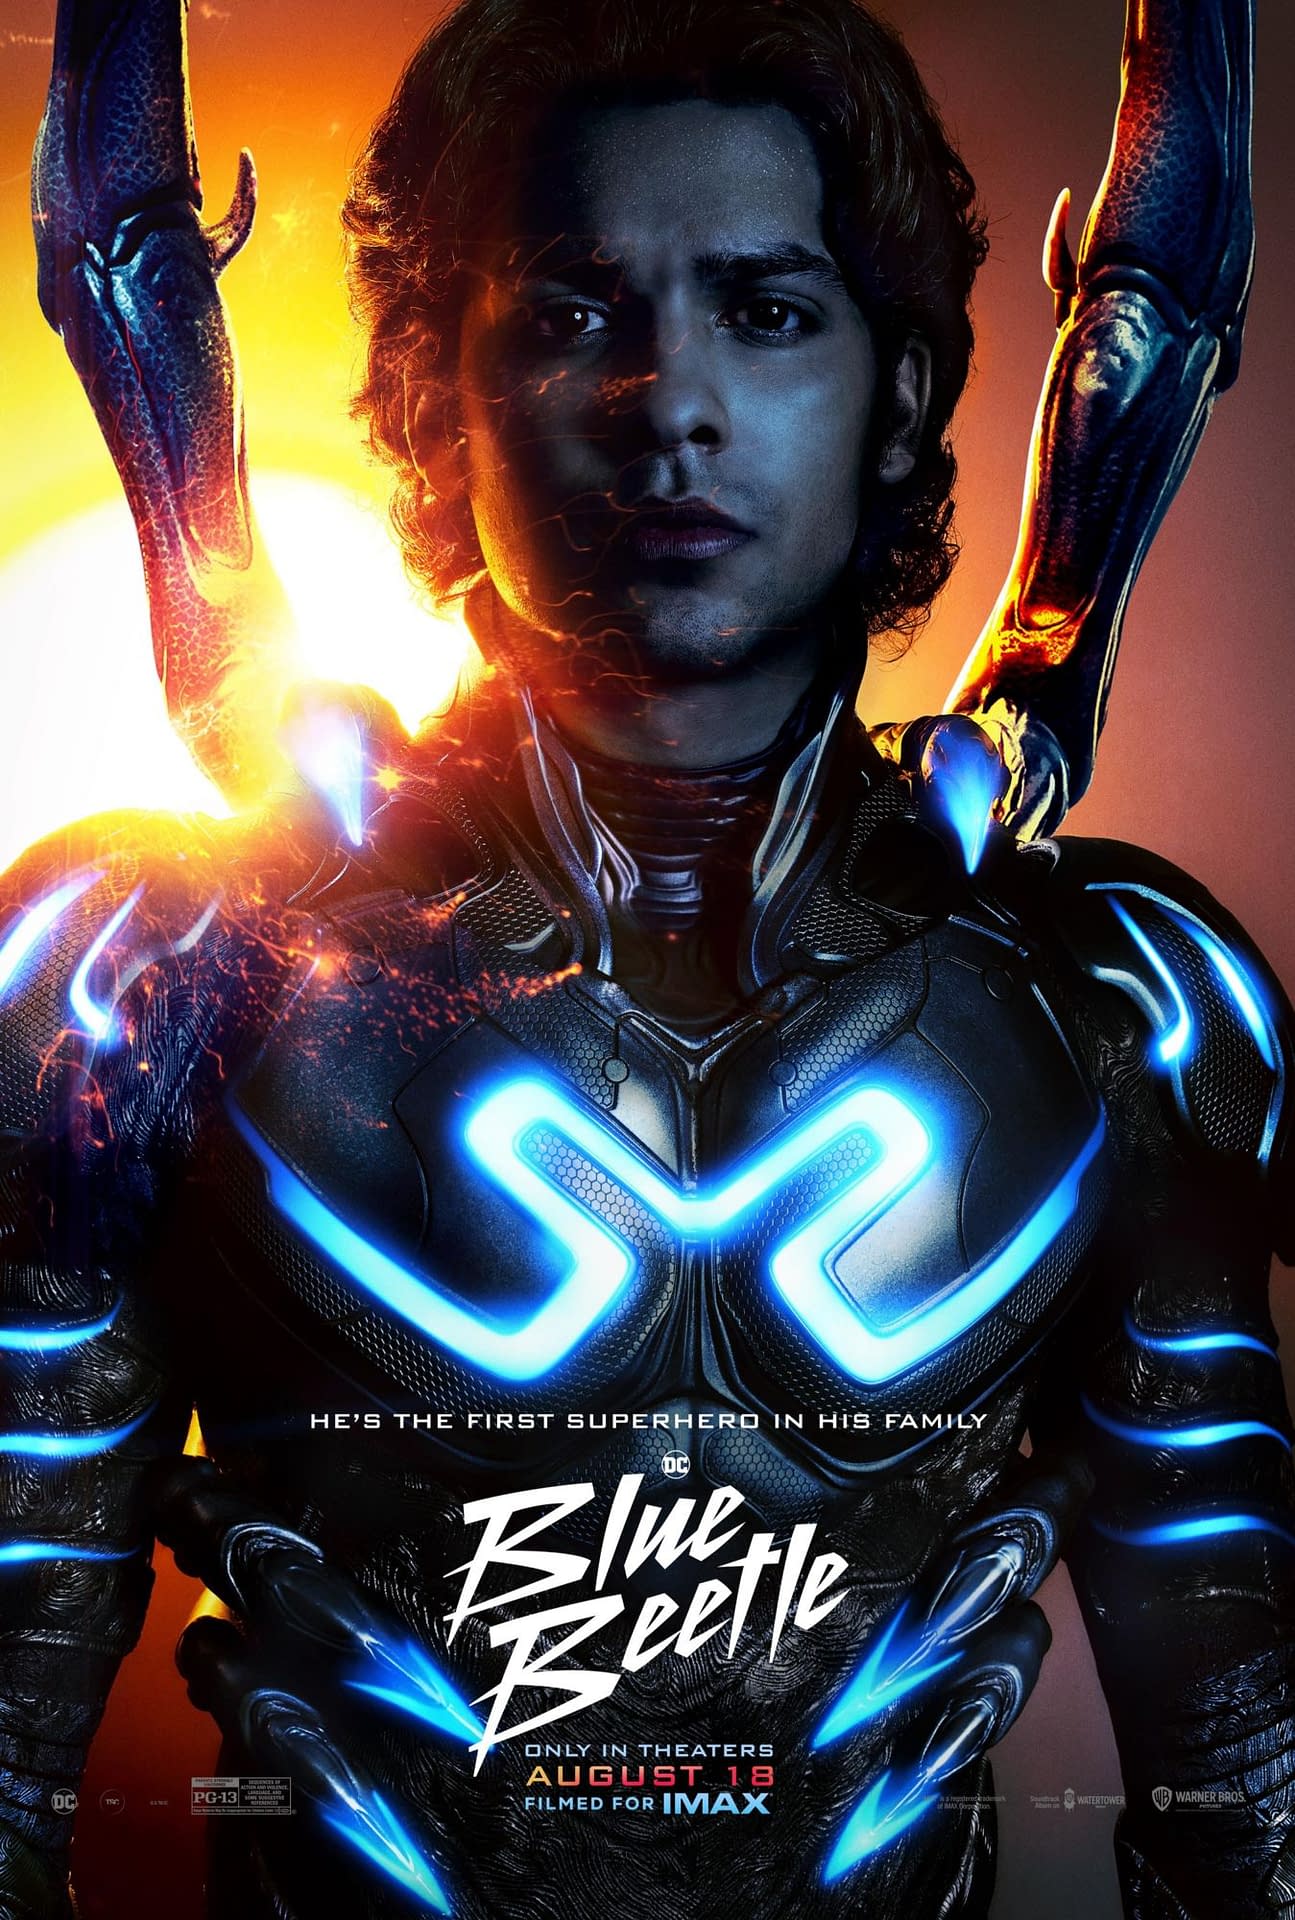 Blue Beetle 2 New Posters As We Head Into Release Weekend